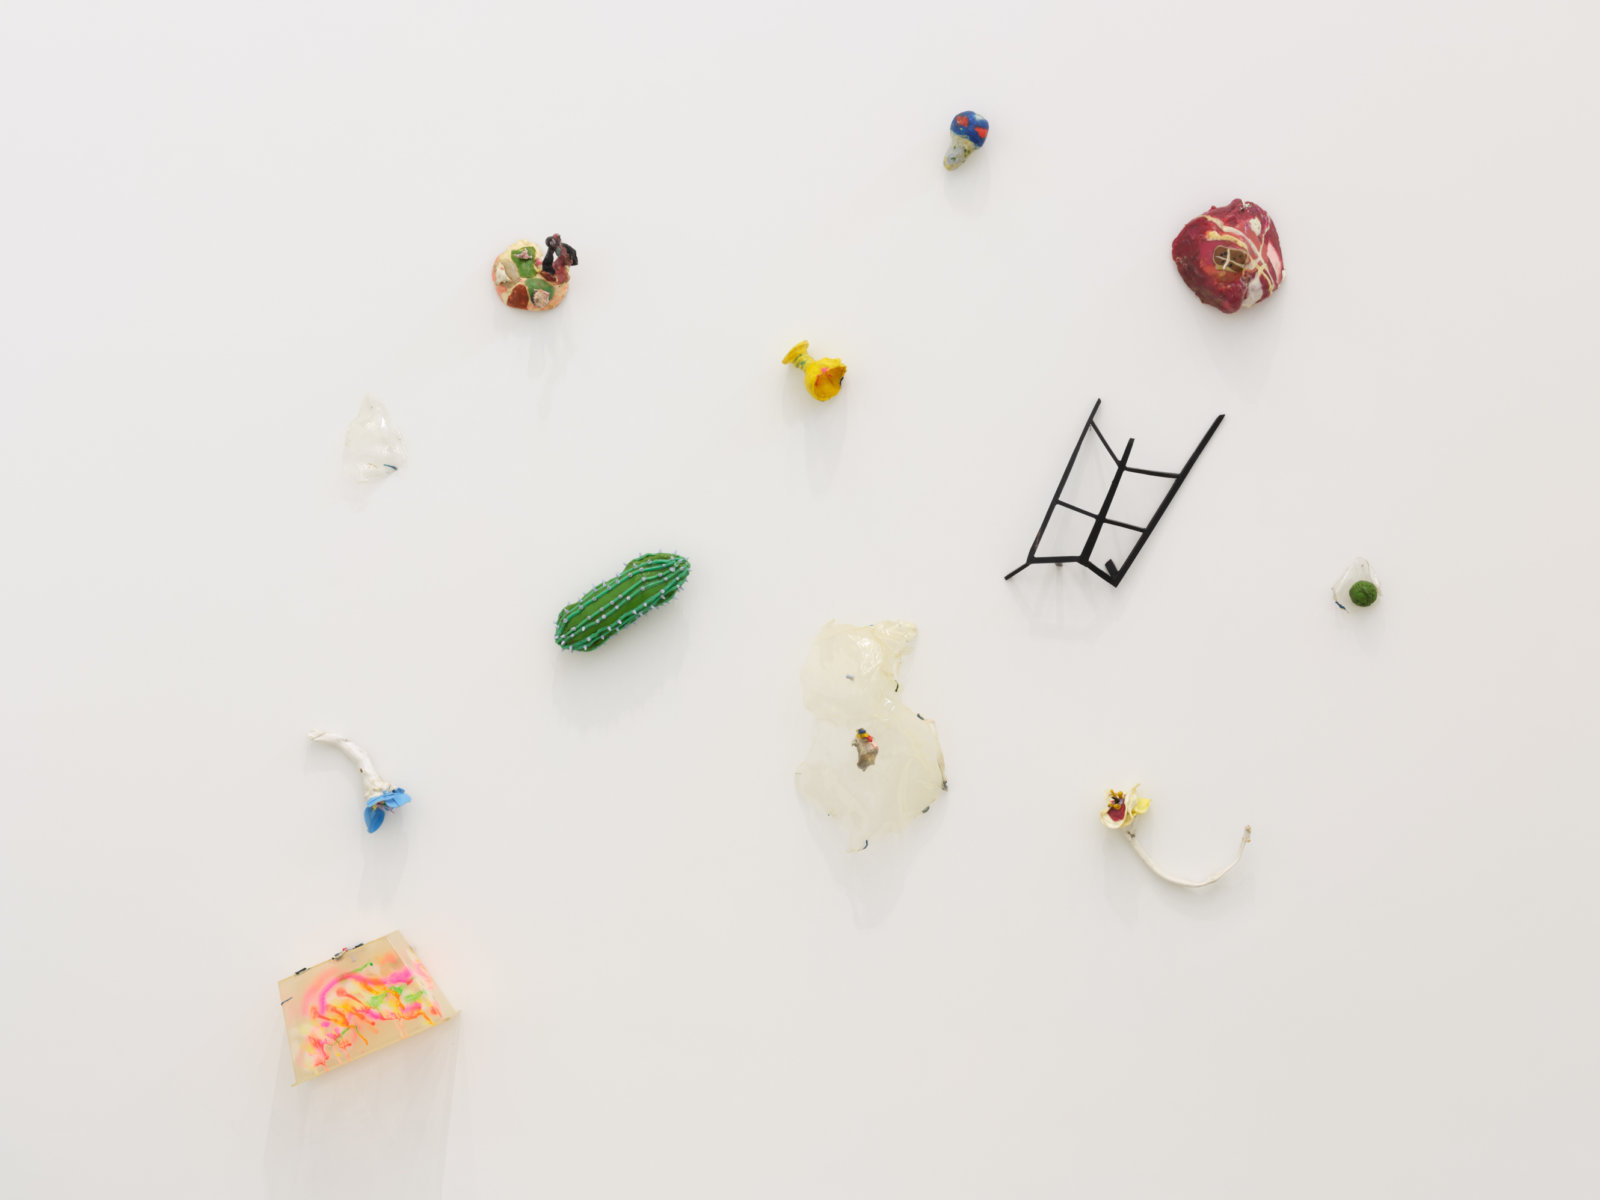 Jerry Pethick, Desert Flowers, Cactus and Skylight (exploded sculpture), 1965, mixed plastics, paint, 82 x 92 x 7 in. (208 x 235 x 18 cm)